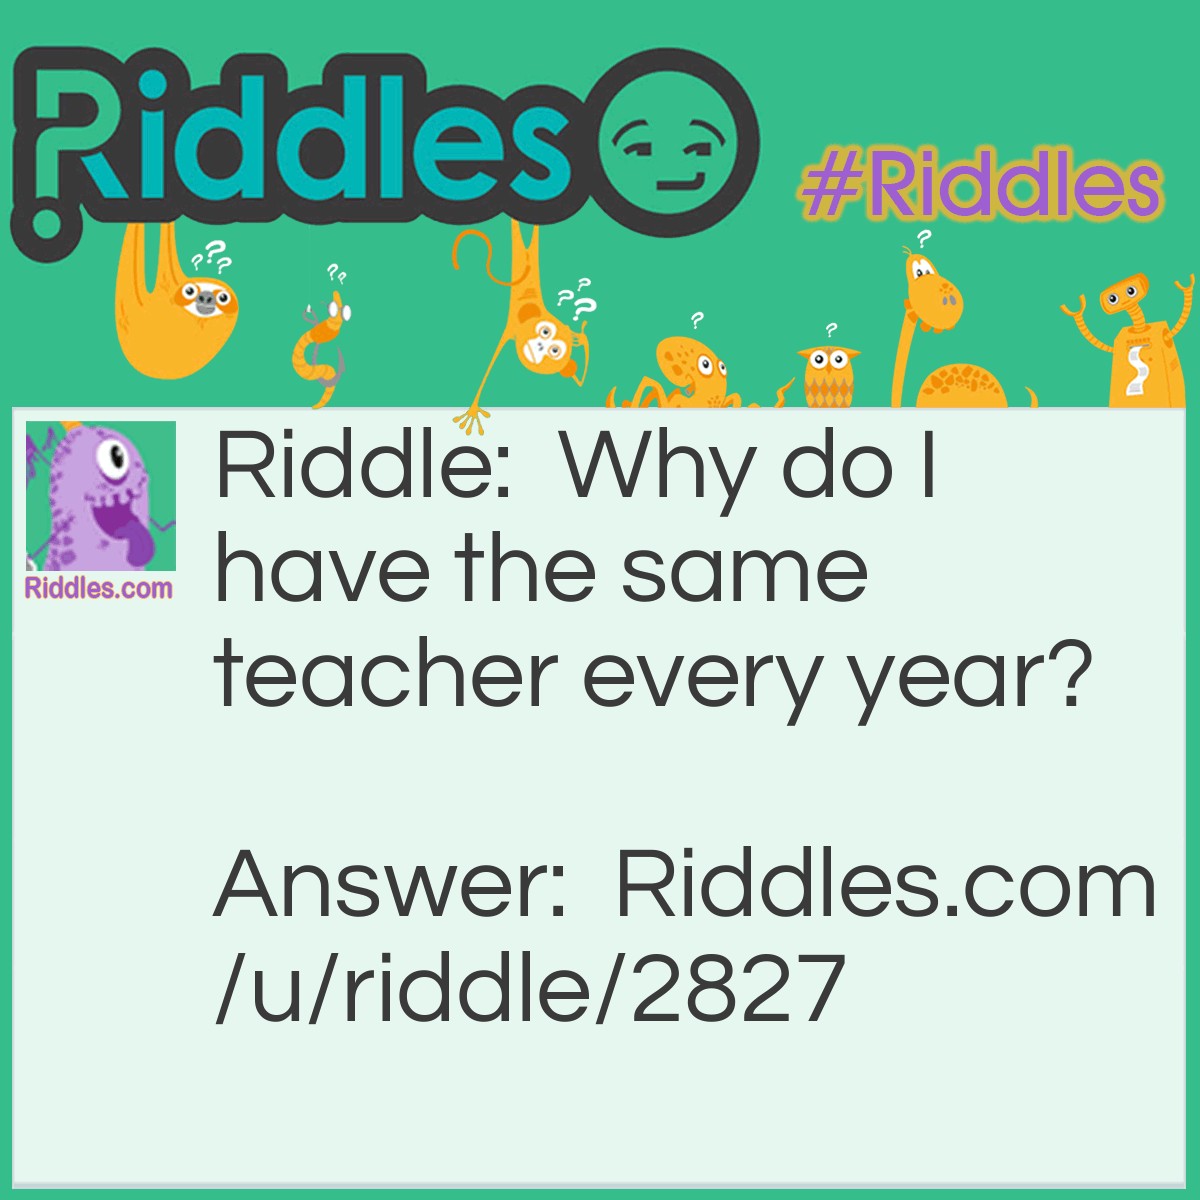 Riddle: Why do I have the same teacher every year? Answer: Because I never move up a grade!!